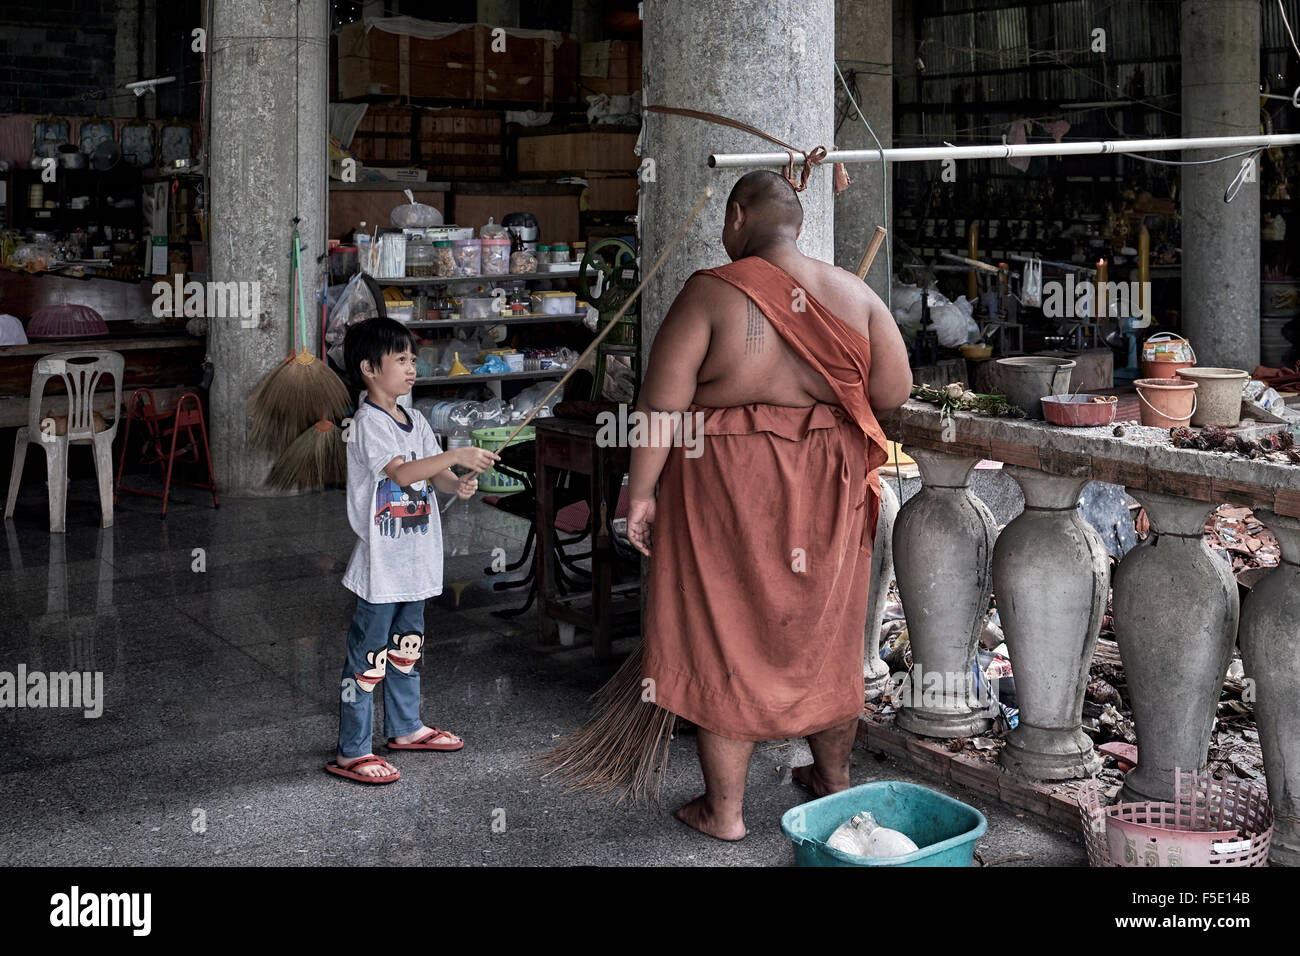 Obese child and friend. Thailand monk, Southeast Asia Stock Photo